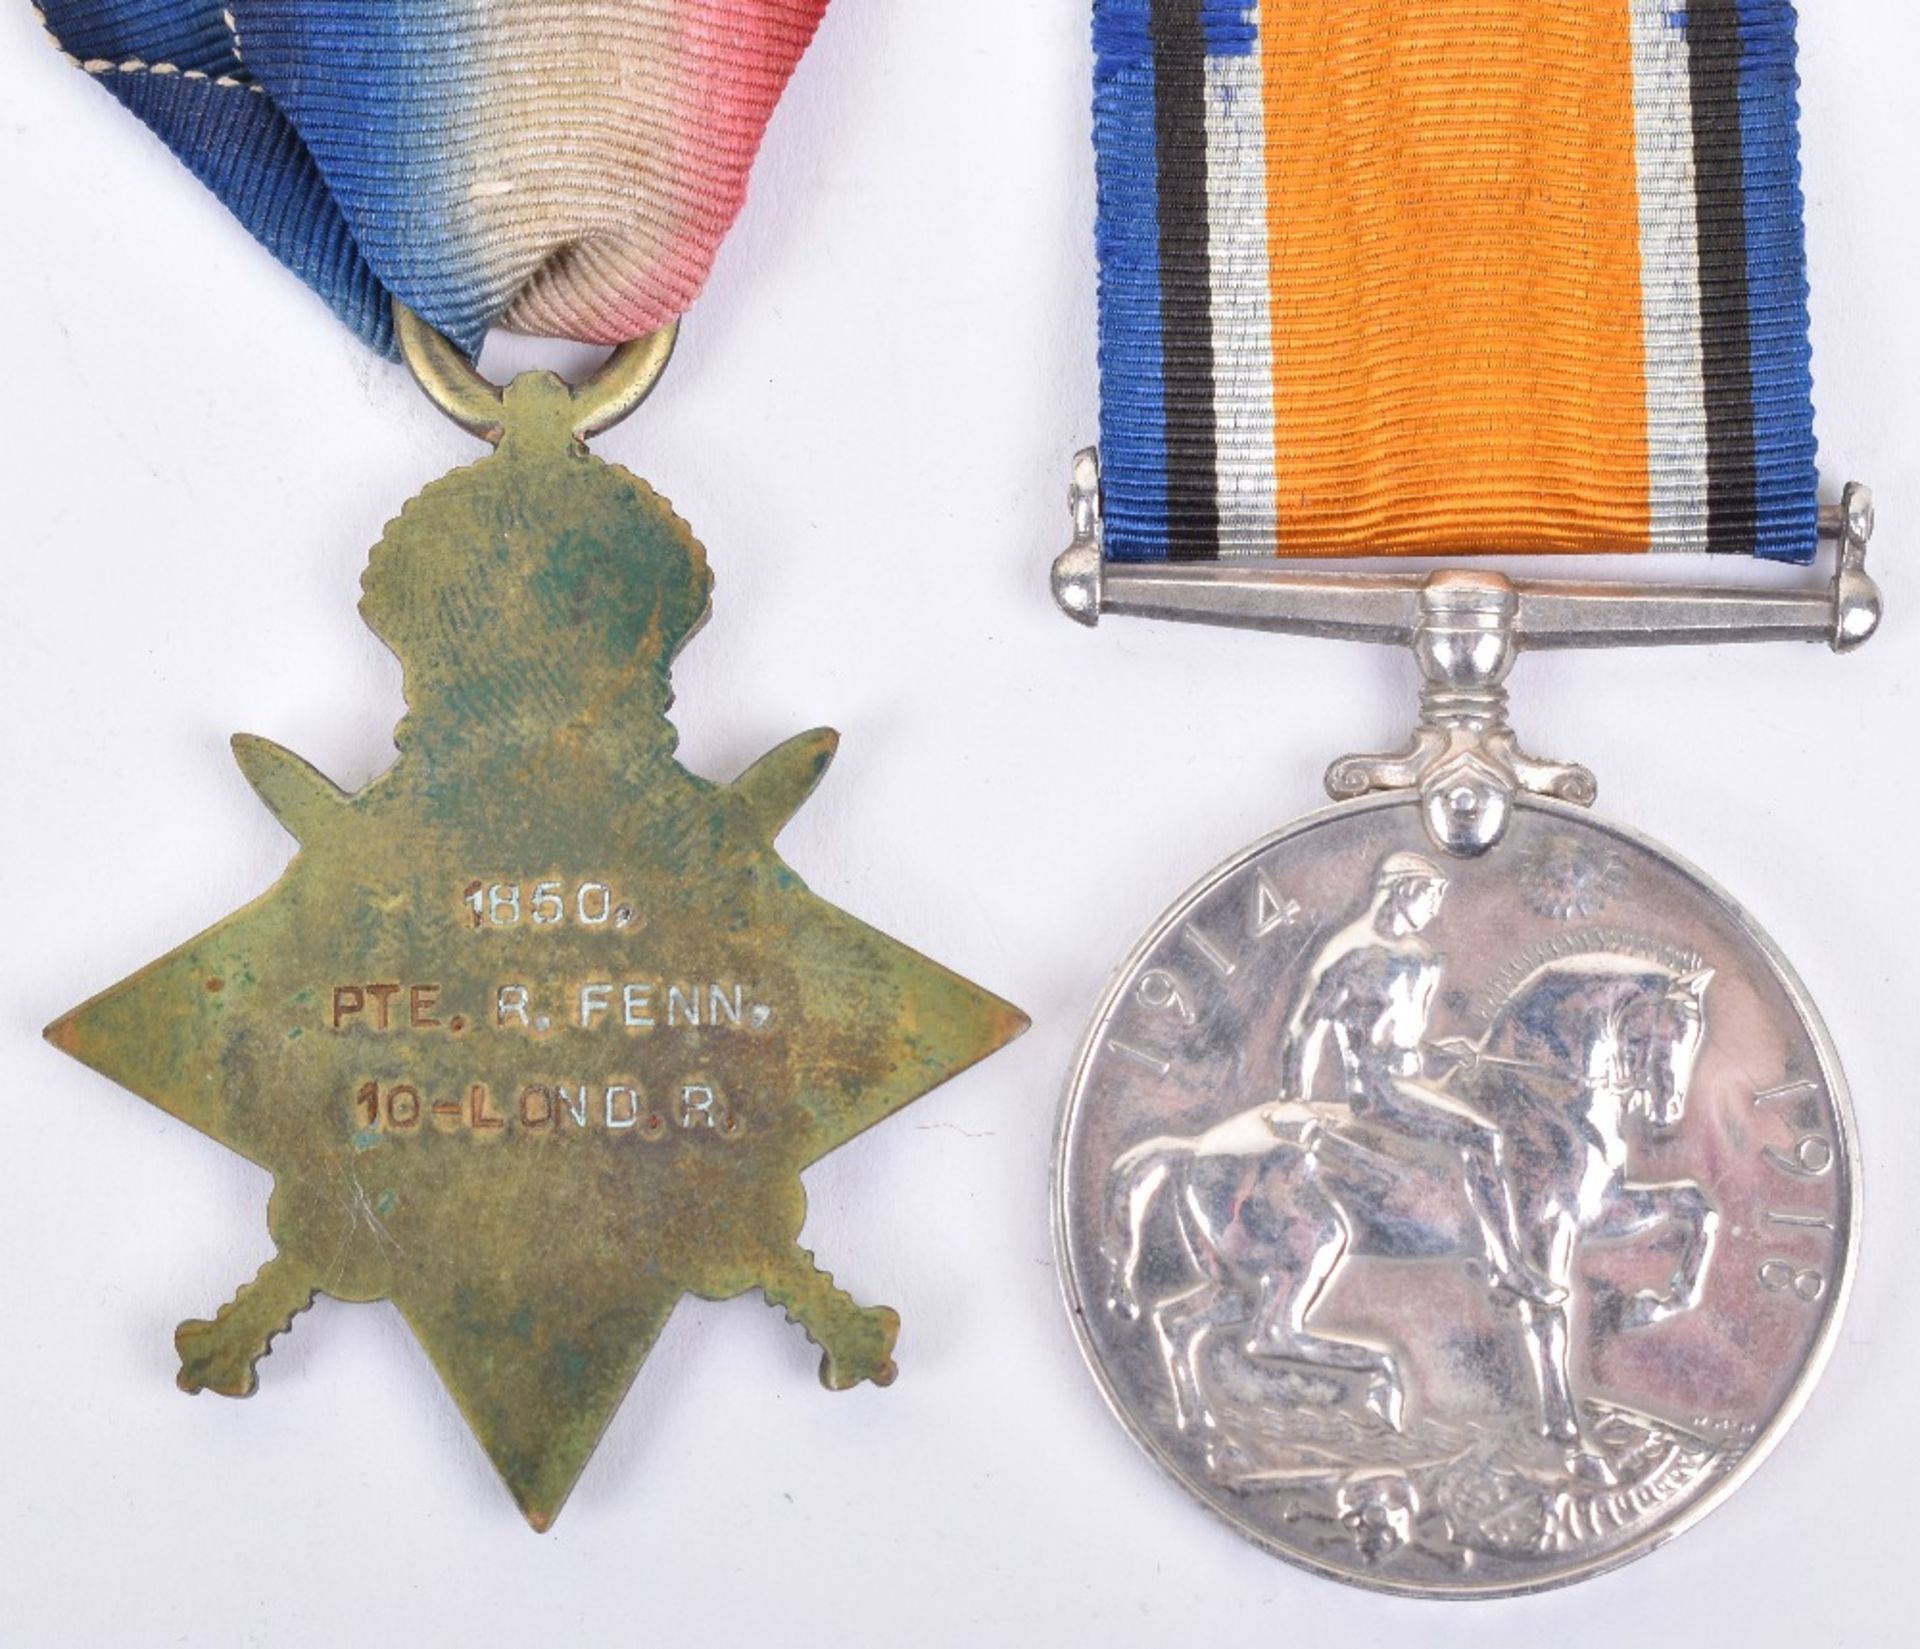 2x Great War Medals of 10th London Regiment Interest - Image 3 of 3